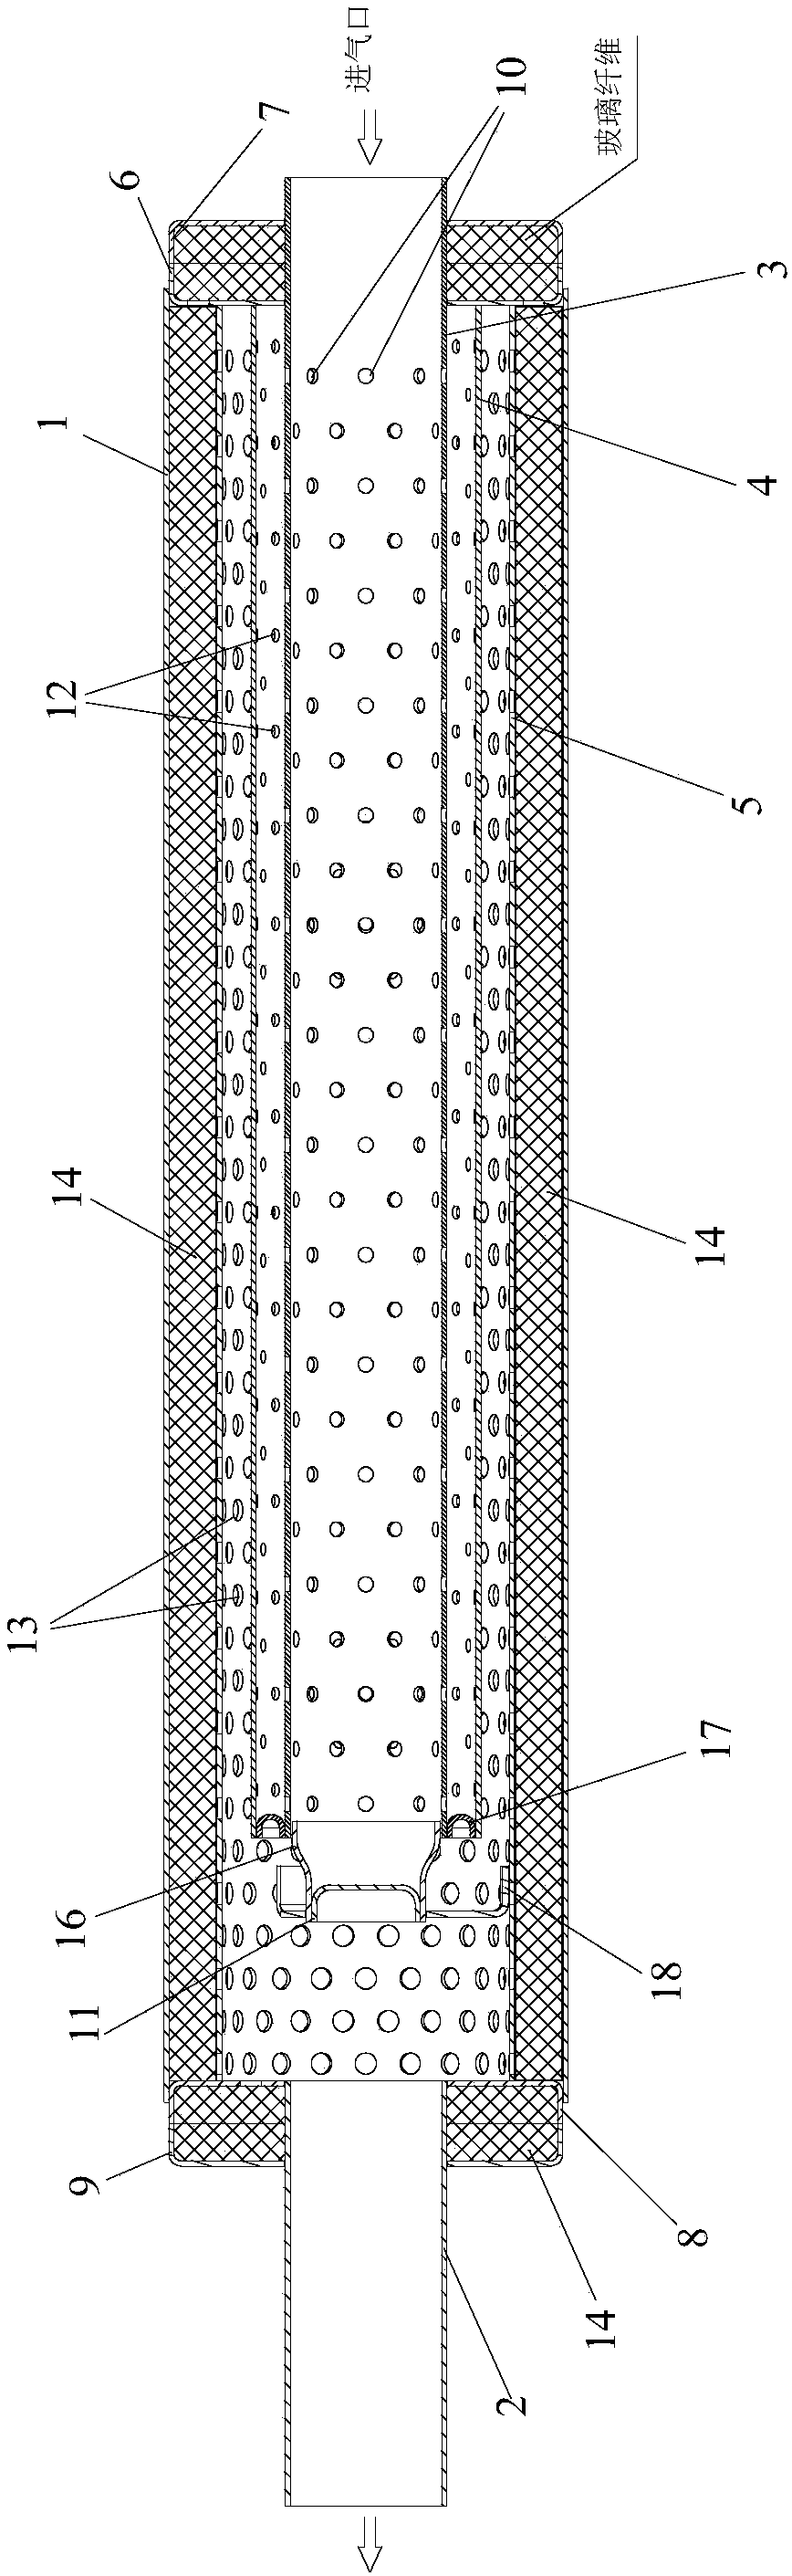 Gasoline engine exhaust silencer composed of porous pipes